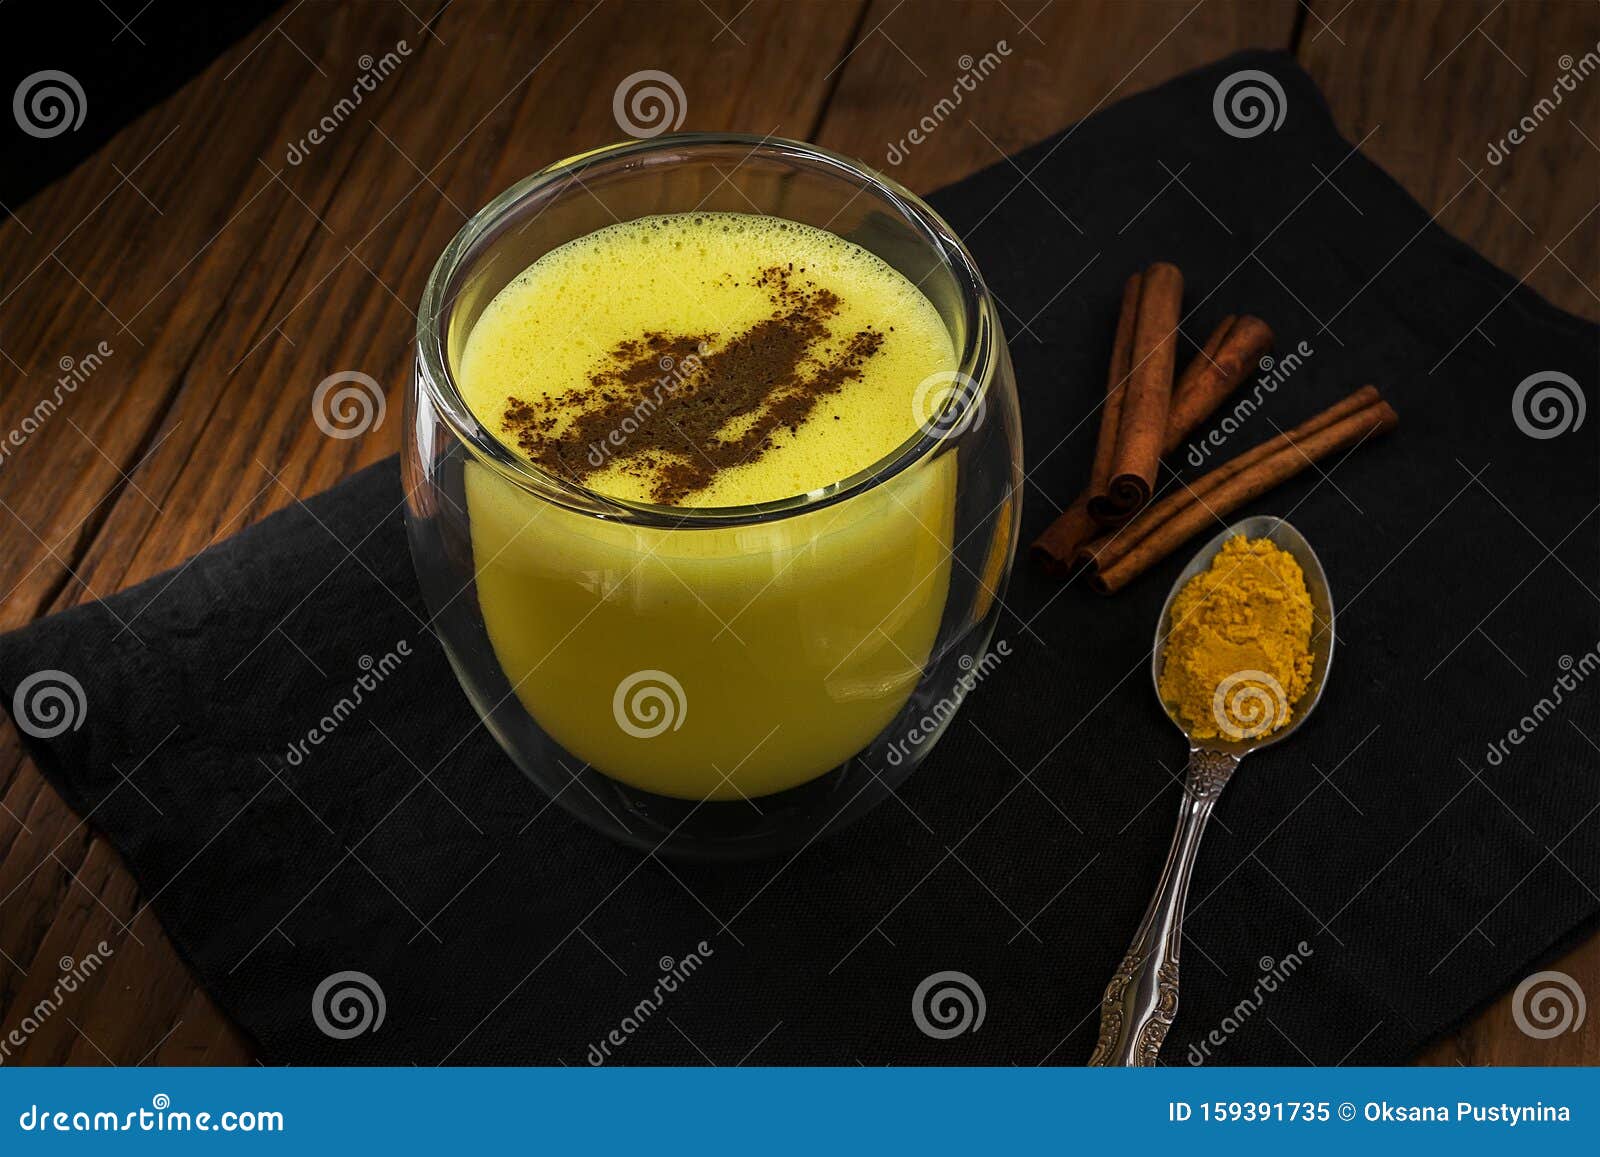 Golden Latte With Cinnamon. Traditional Indian Drink Turmeric Milk On A ...